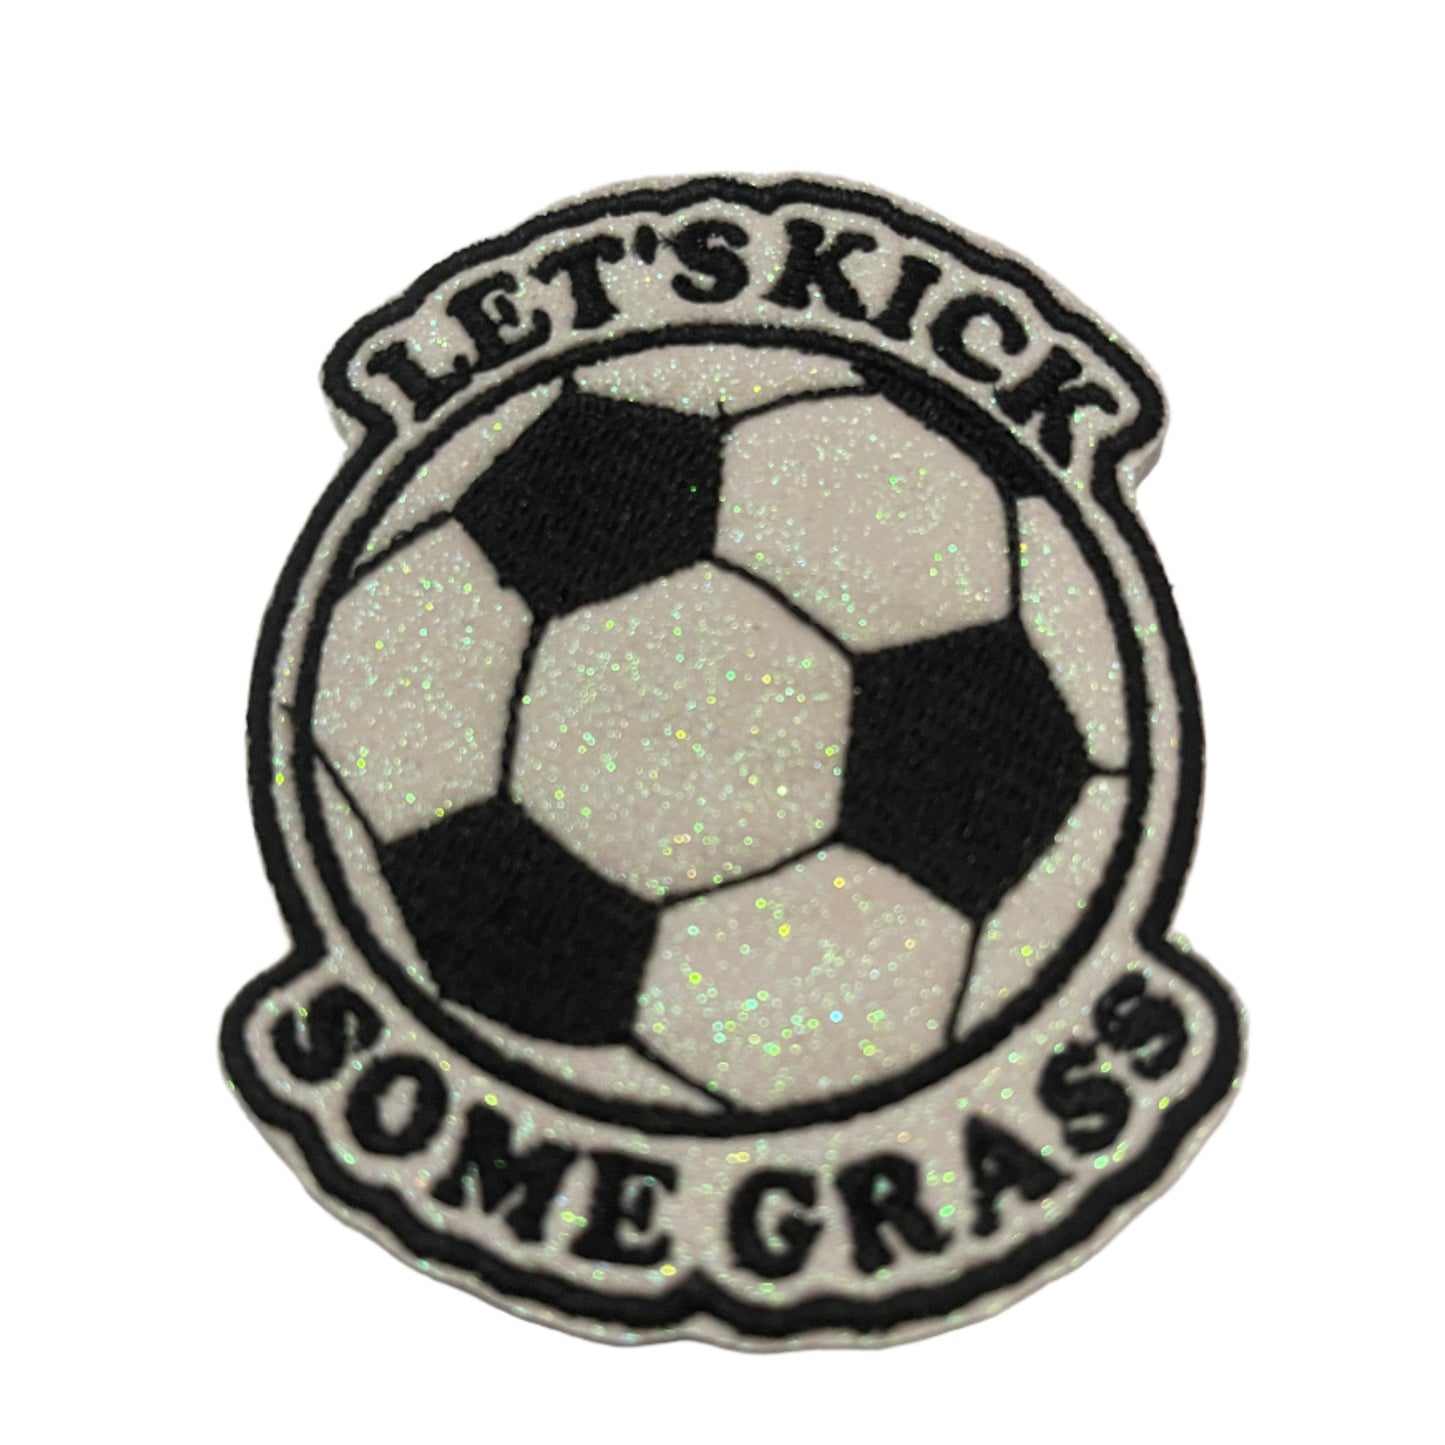 Handmade Soccer Iron-On Patch - Let's Kick Some Grass - Sporty Fun and Humor